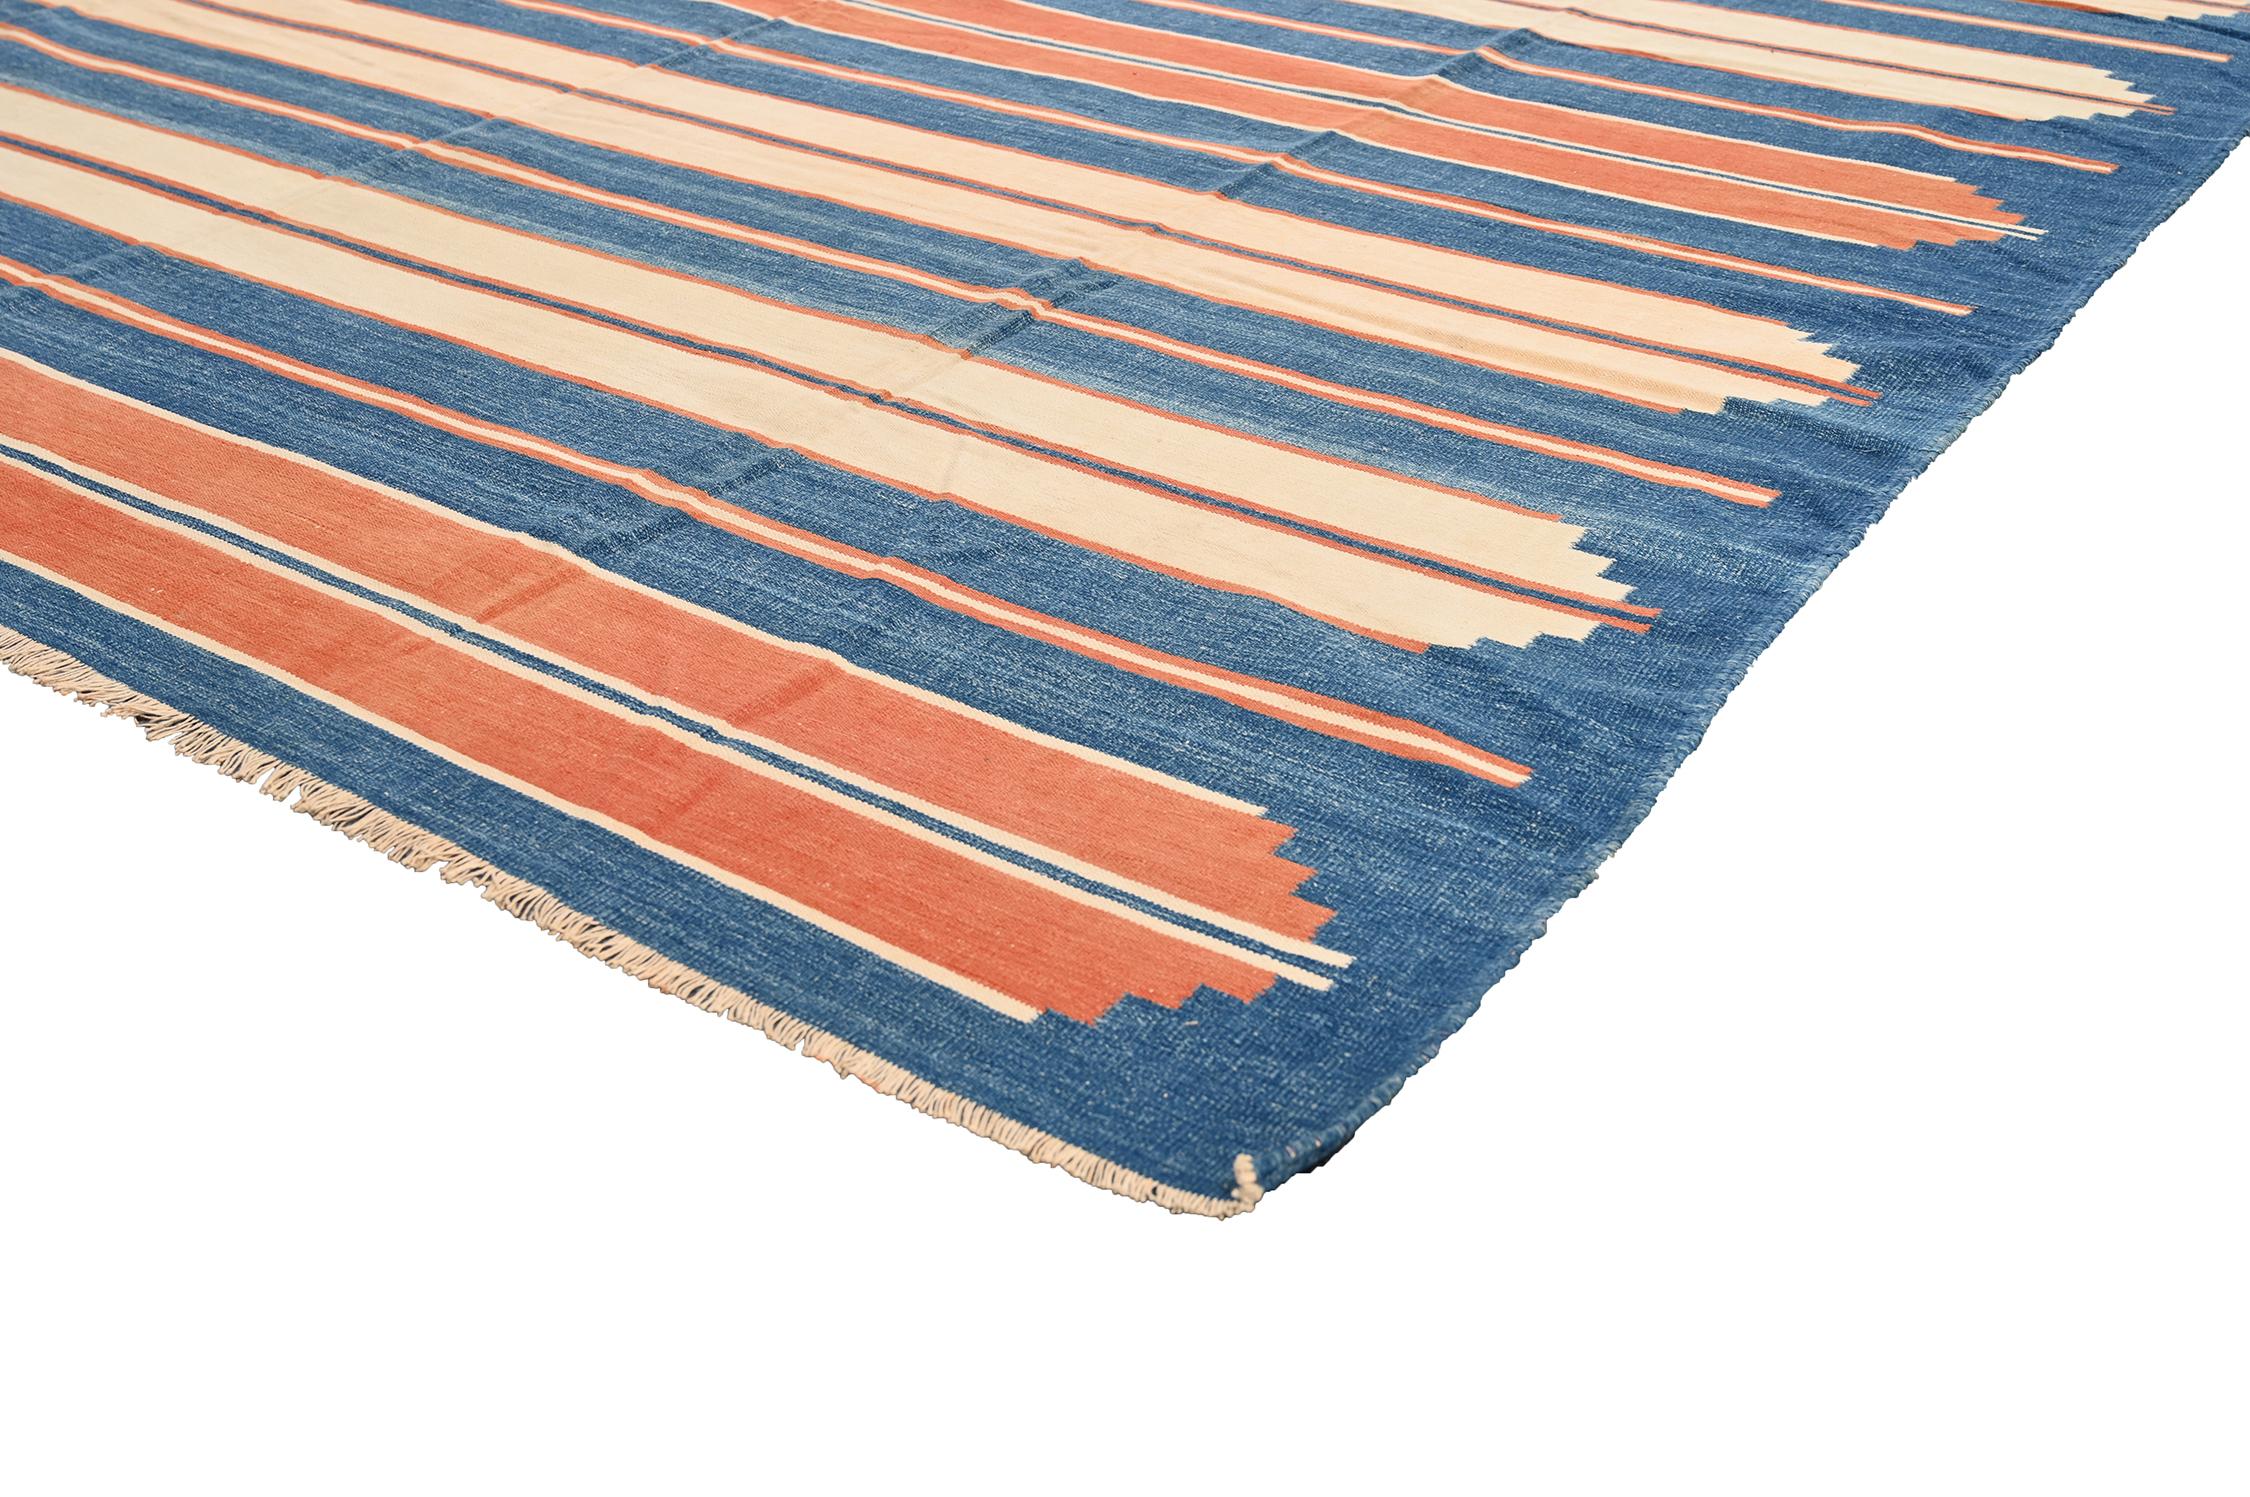 Hand-Knotted Vintage Dhurrie Flat Weave in Blue and Orange Stripes Patterns by Rug & Kilim For Sale